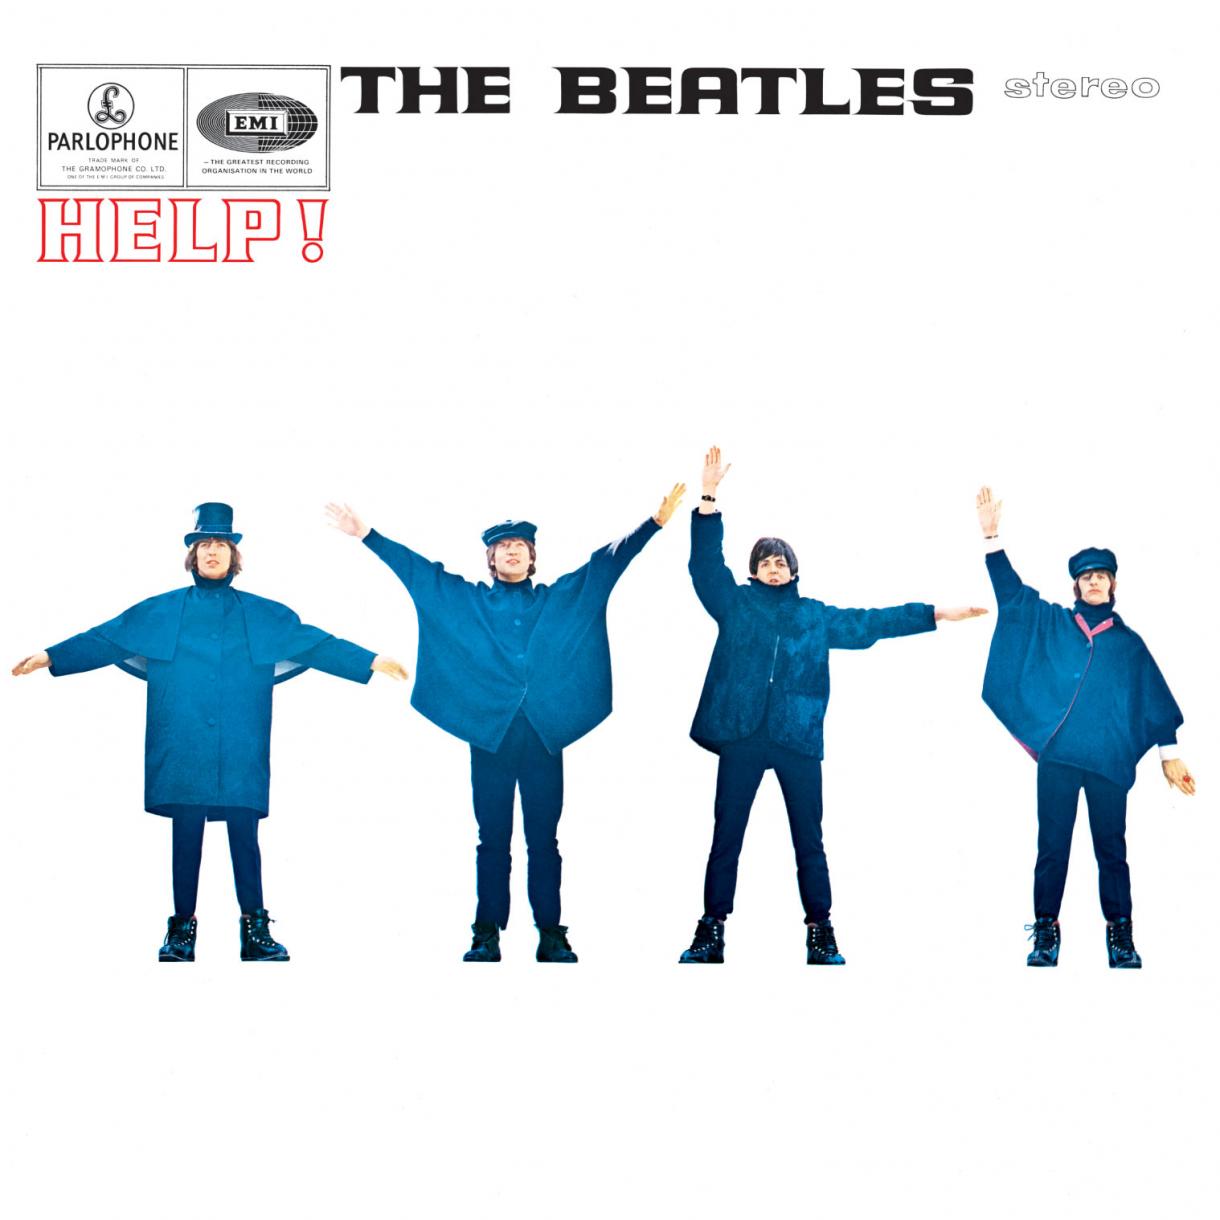 "Help!" by The Beatles album cover. Members of the band are wearing oversized blue coats standing against a white background with their arms in various poses.